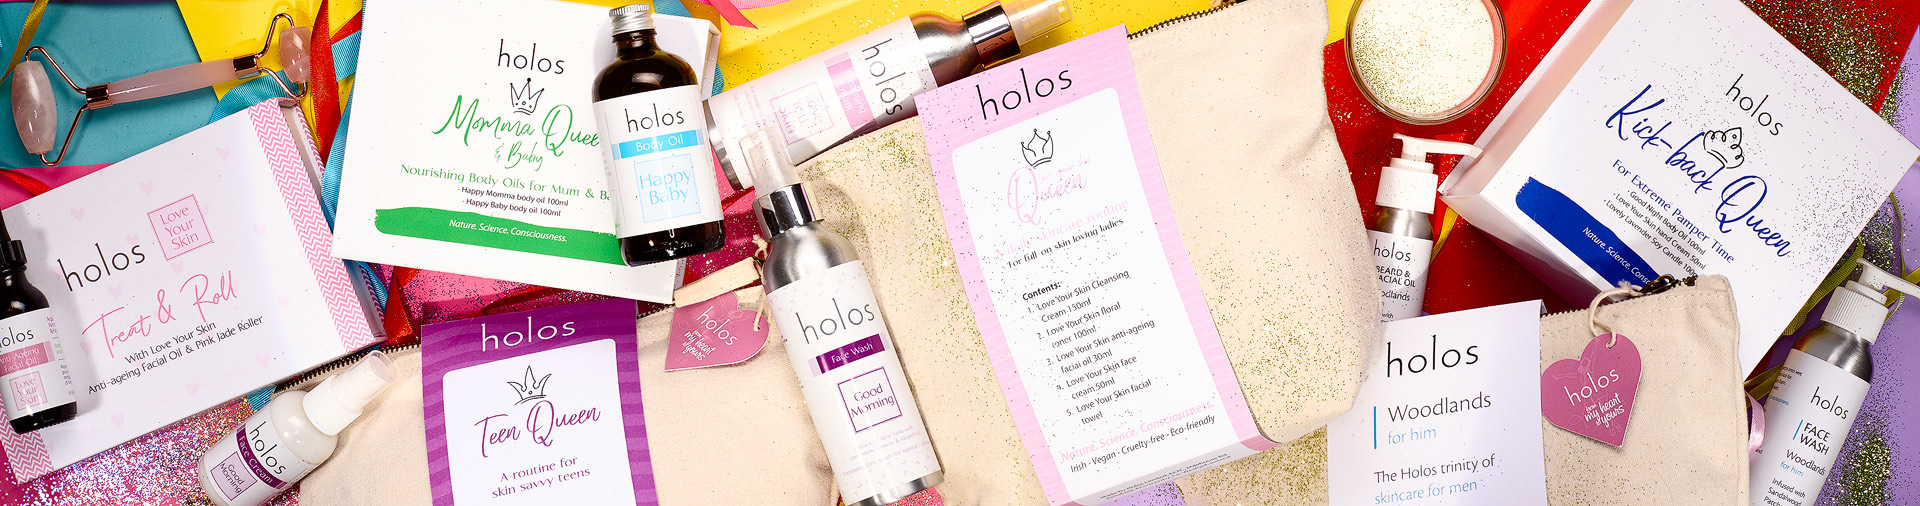 Christmas gifts from Holos Skincare